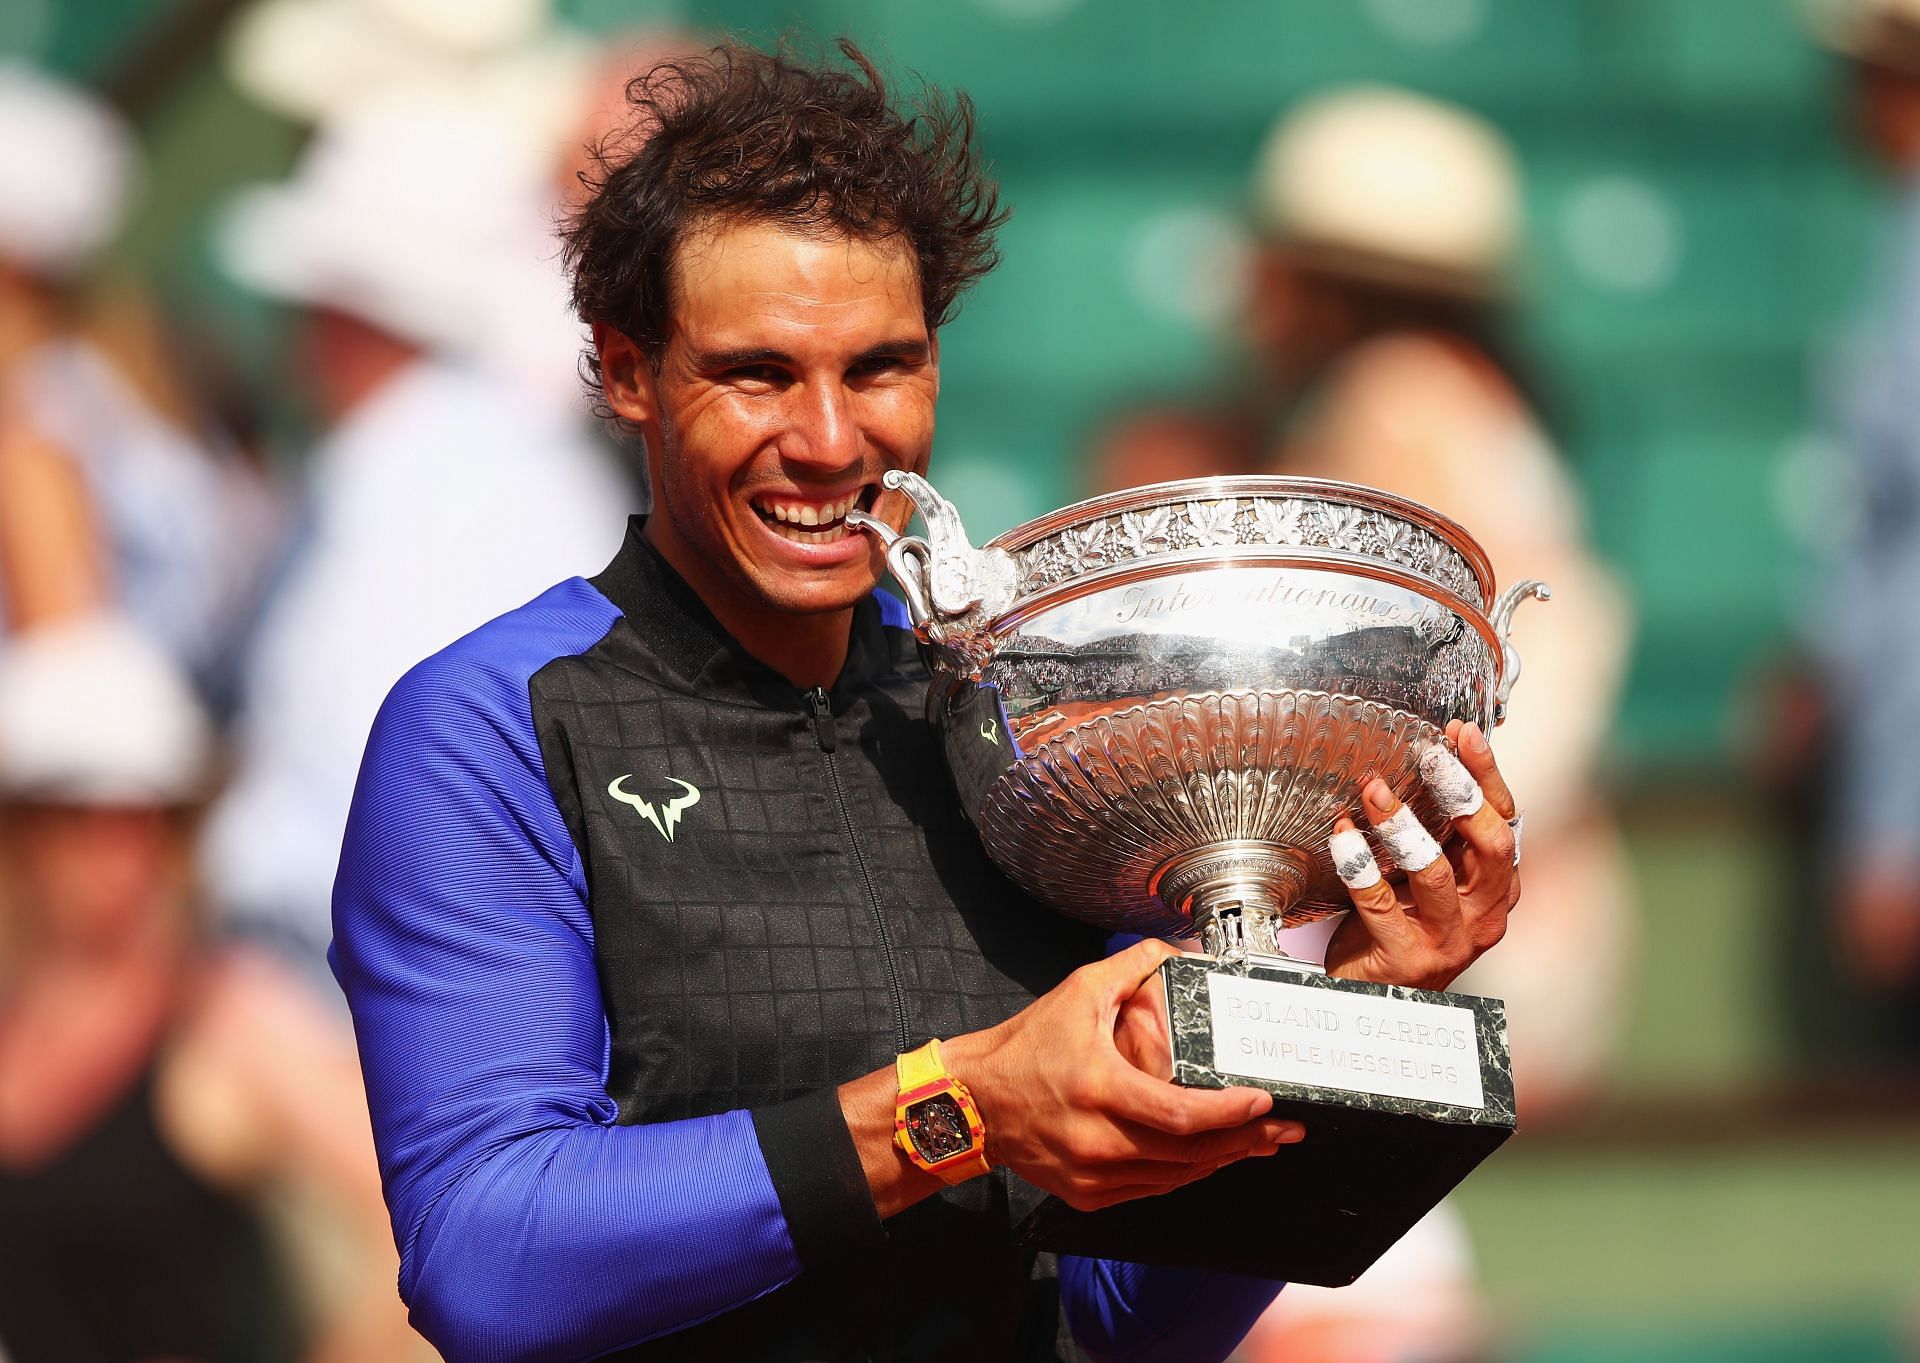 Even at the age of 14, Rafael Nadal had a maturity beyond the years, according to Pat Cash